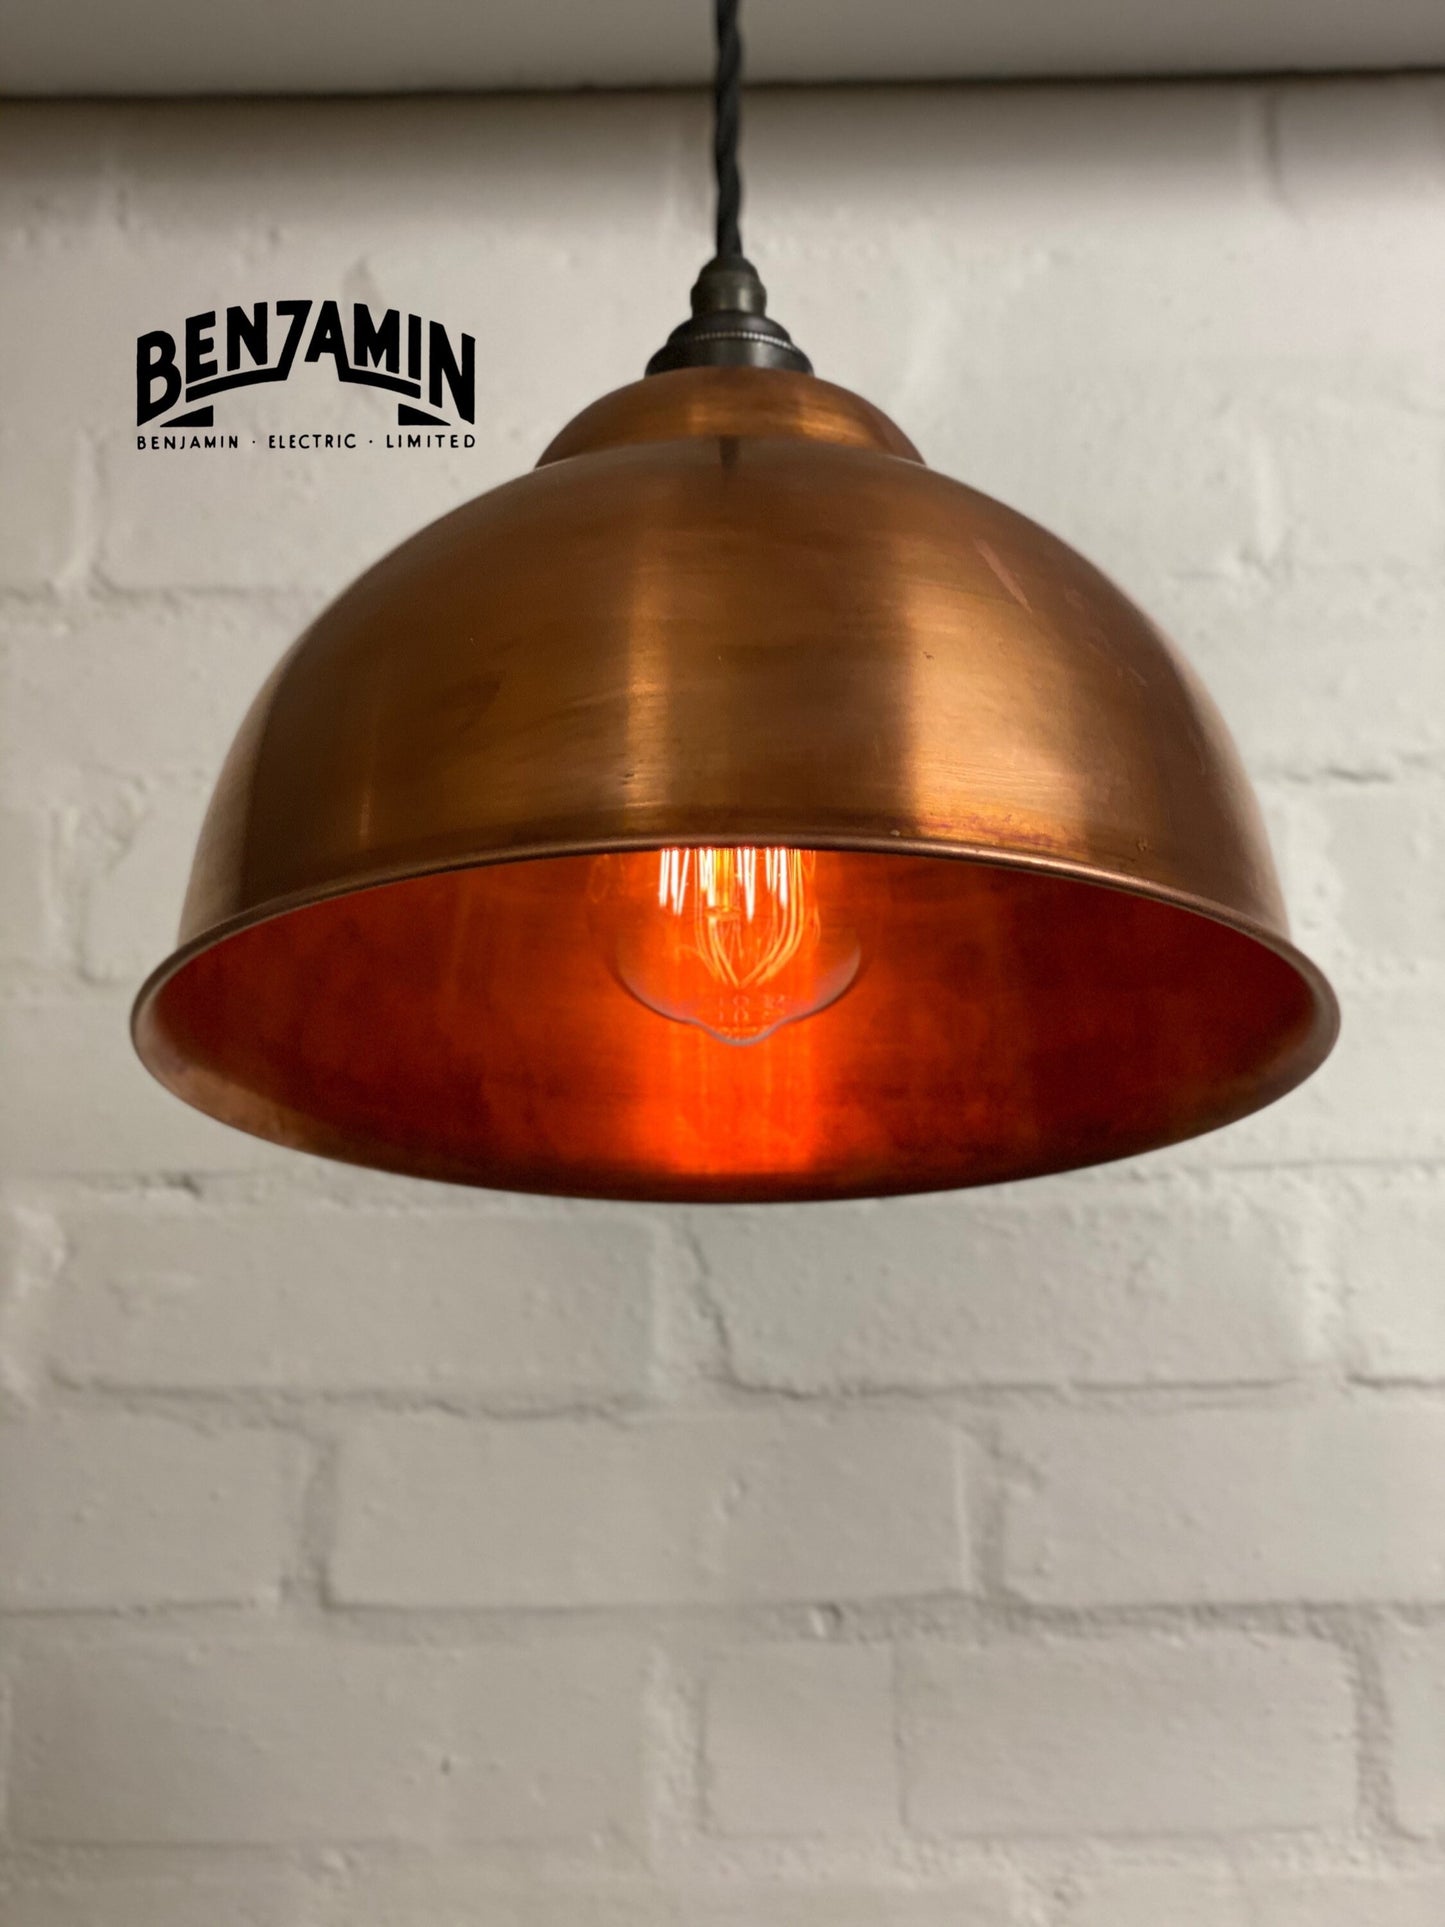 Morley XL ~ Copper Industrial factory shade light ceiling dining room kitchen table vintage edison filament lamps pendant bar